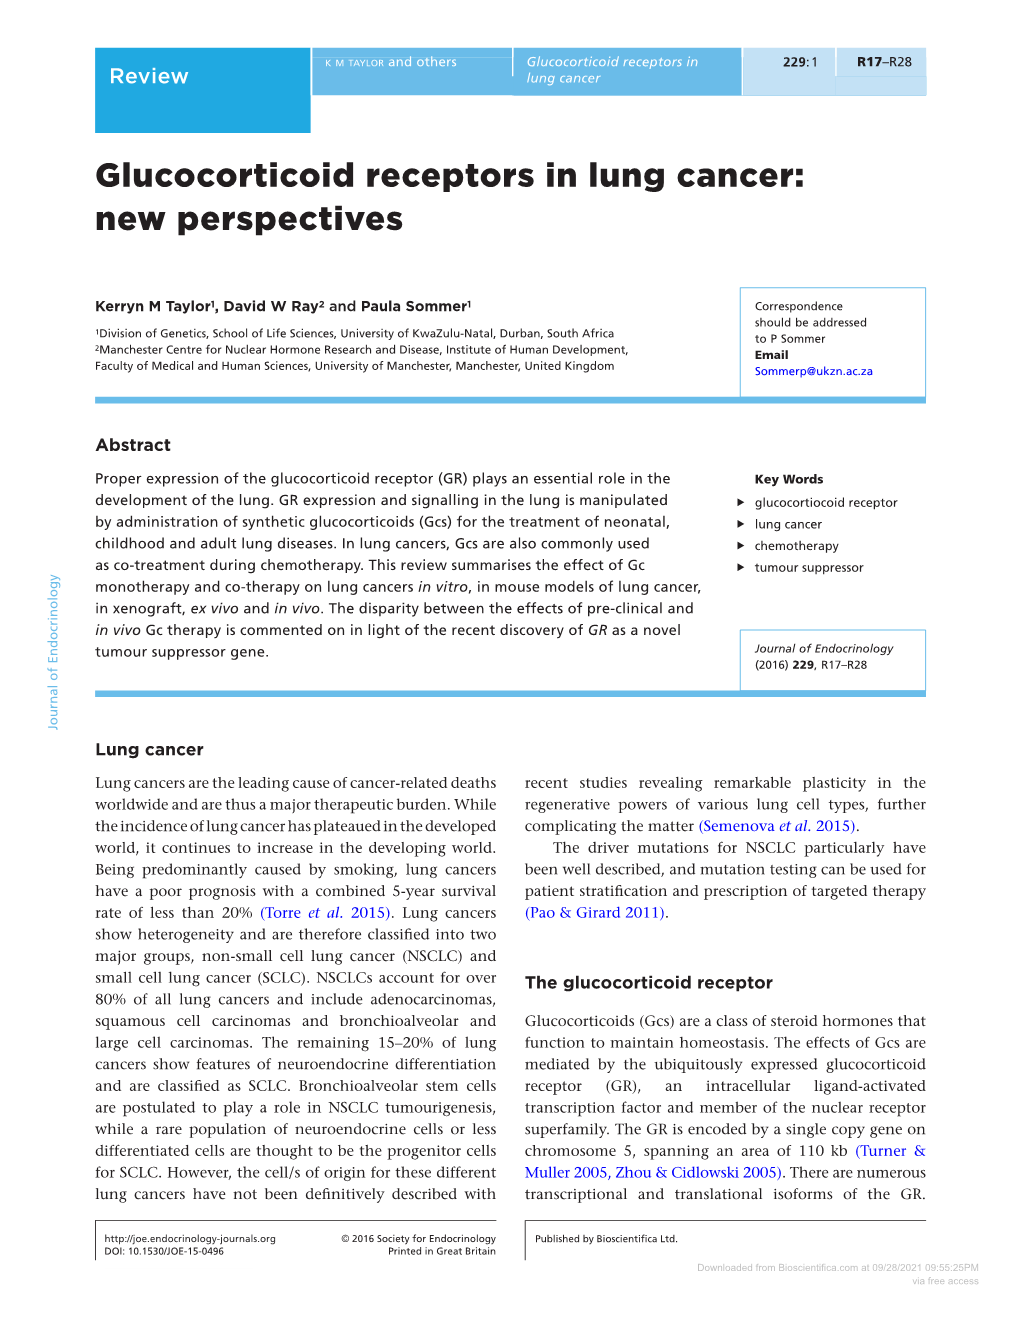 Glucocorticoid Receptors in Lung Cancer: New Perspectives